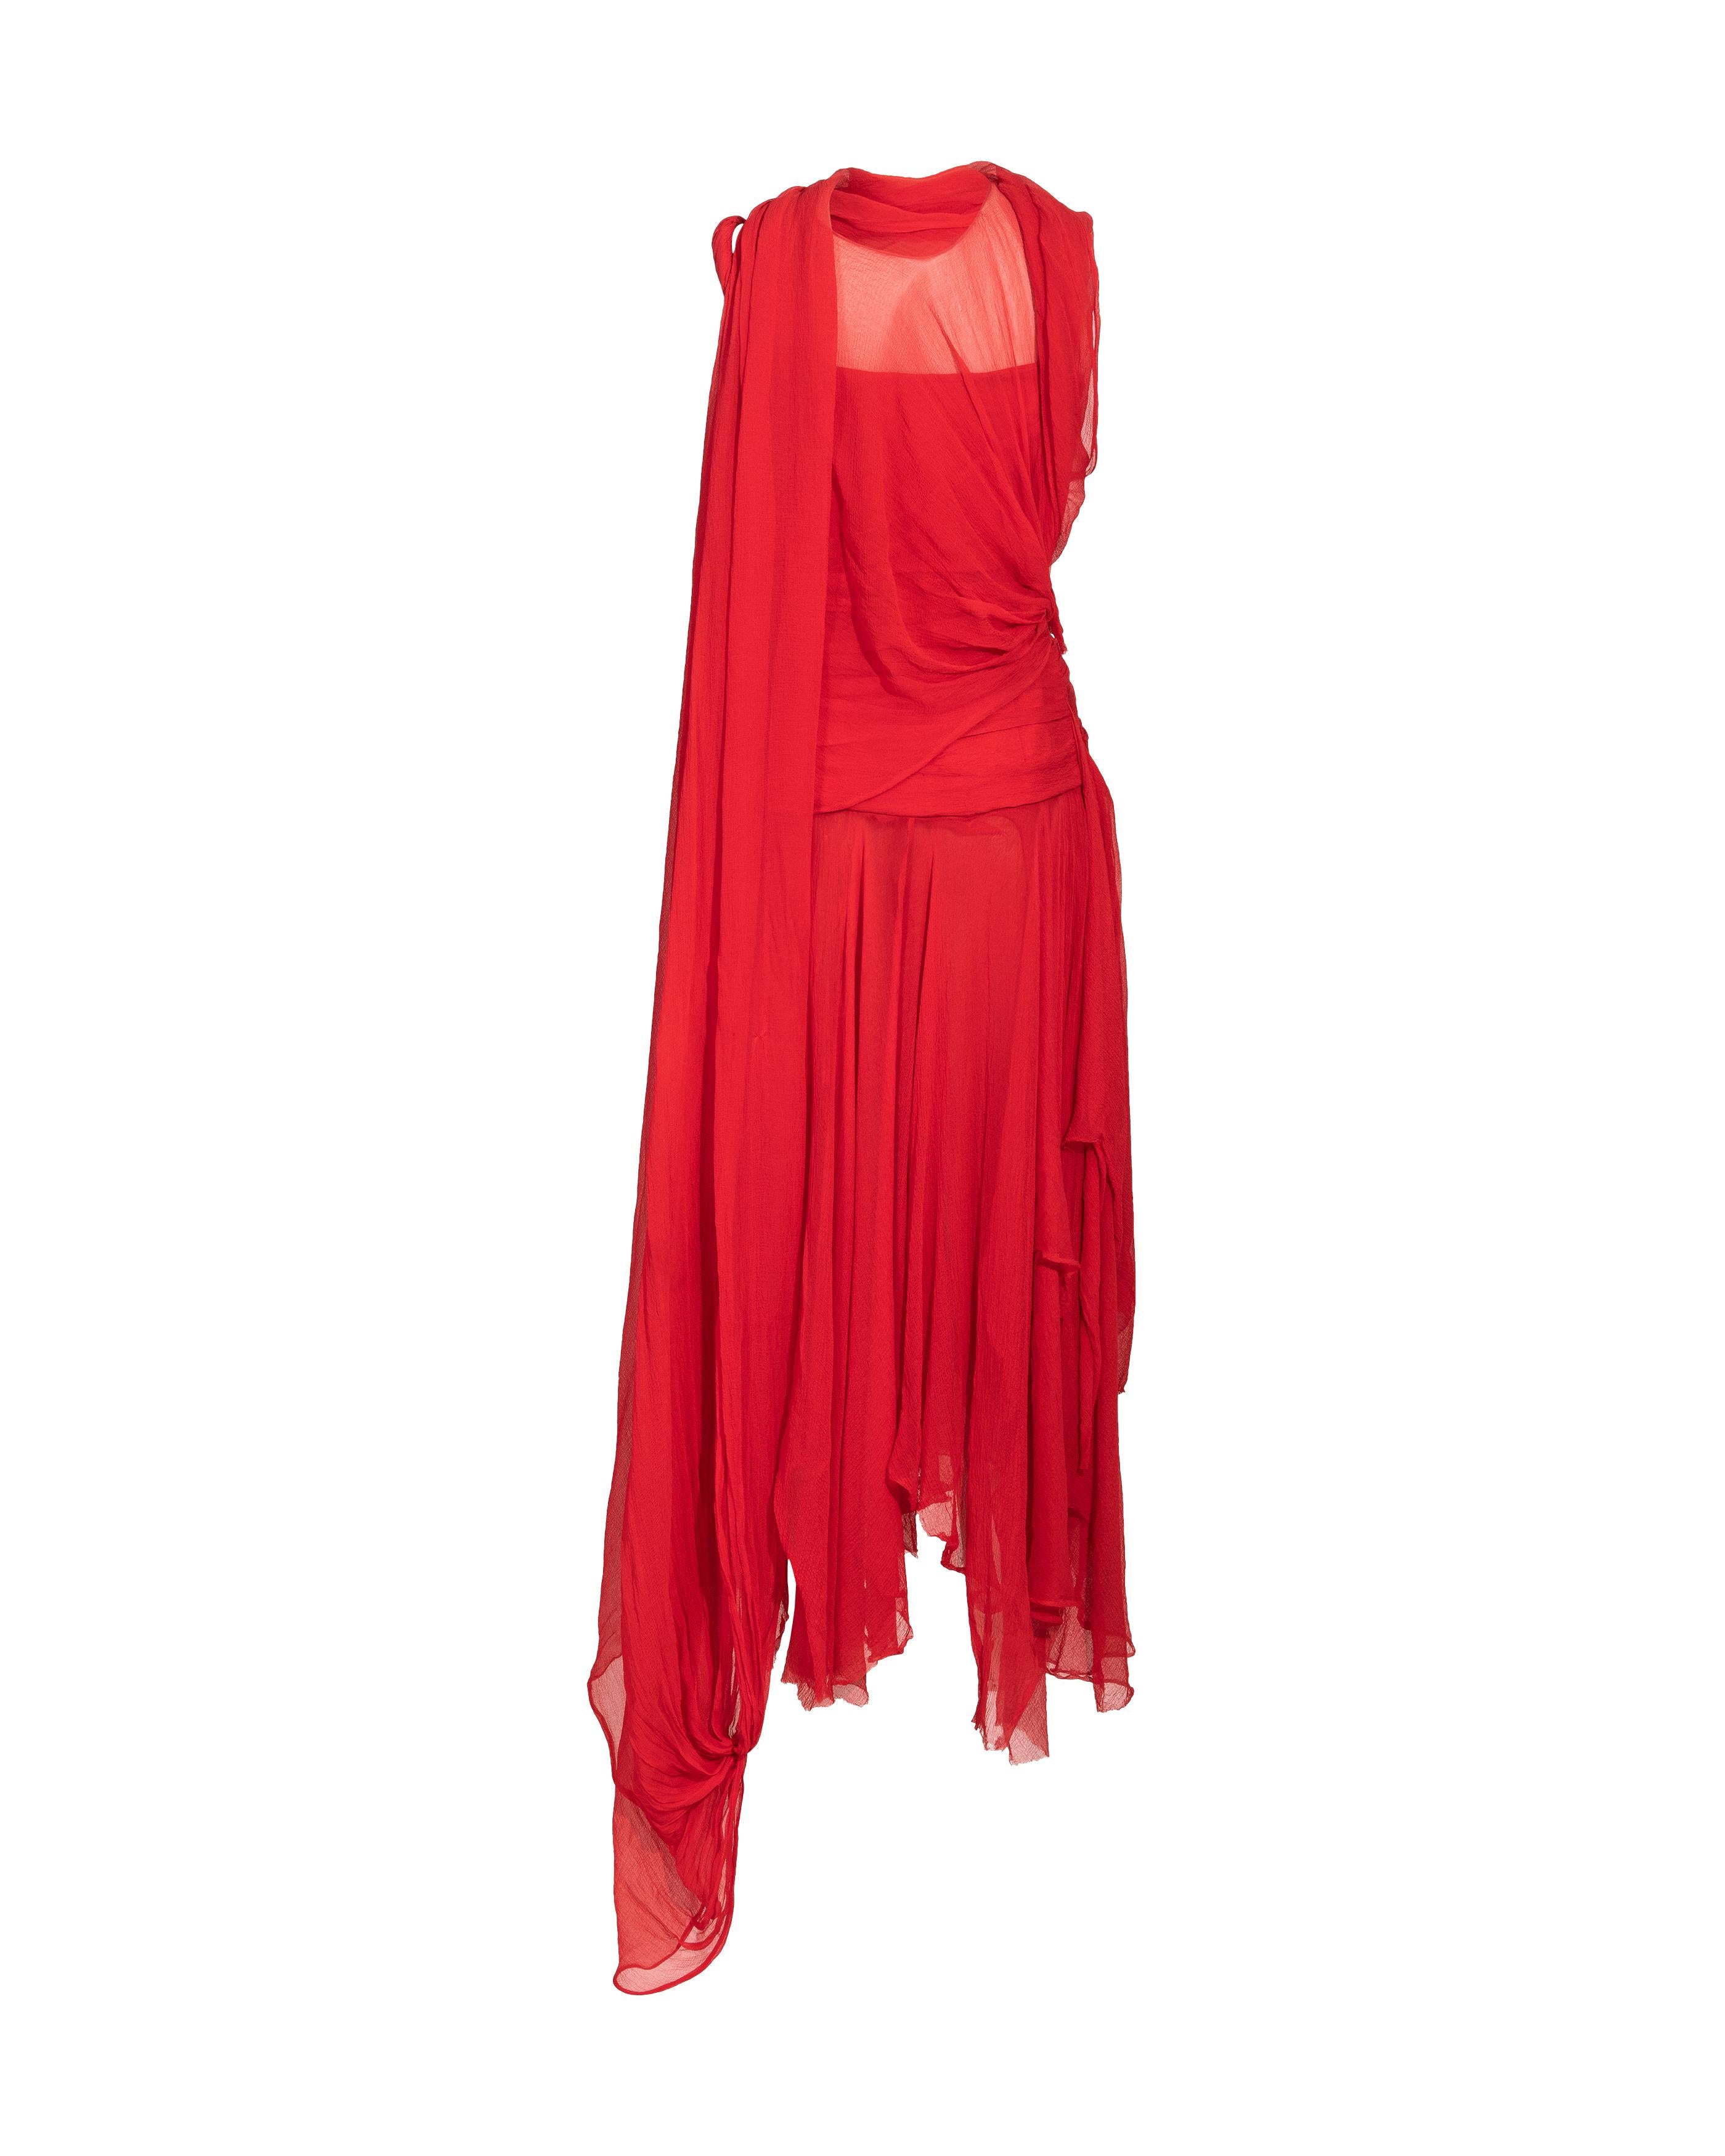 S/S 2003 Alexander McQueen  'Irere' Collection Red Silk Chiffon Gown with Sash 9